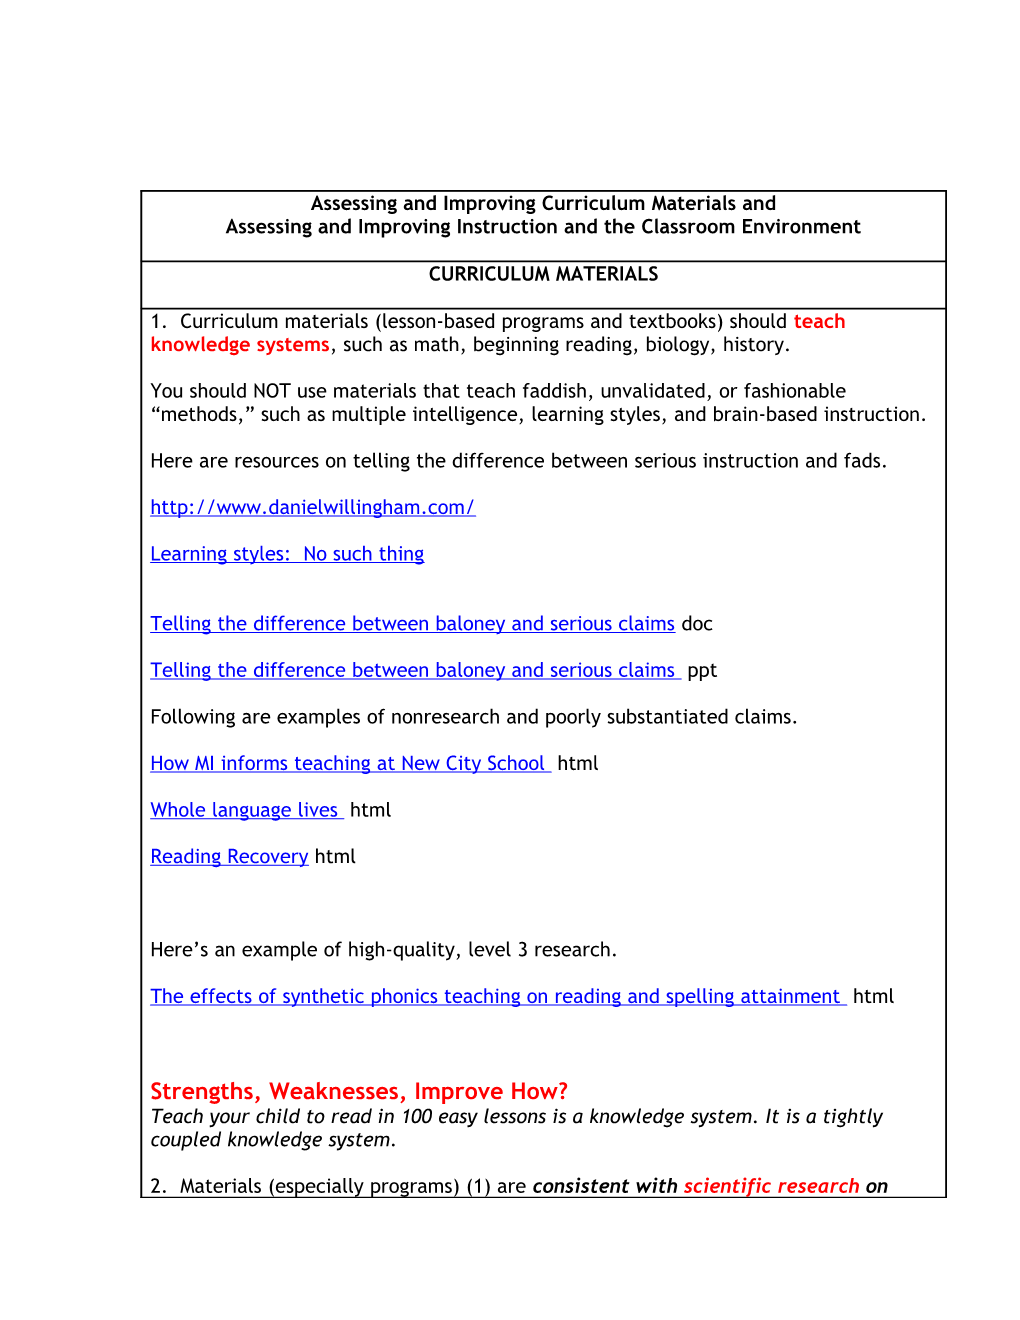 Assessing and Improving Curriculum Materials And